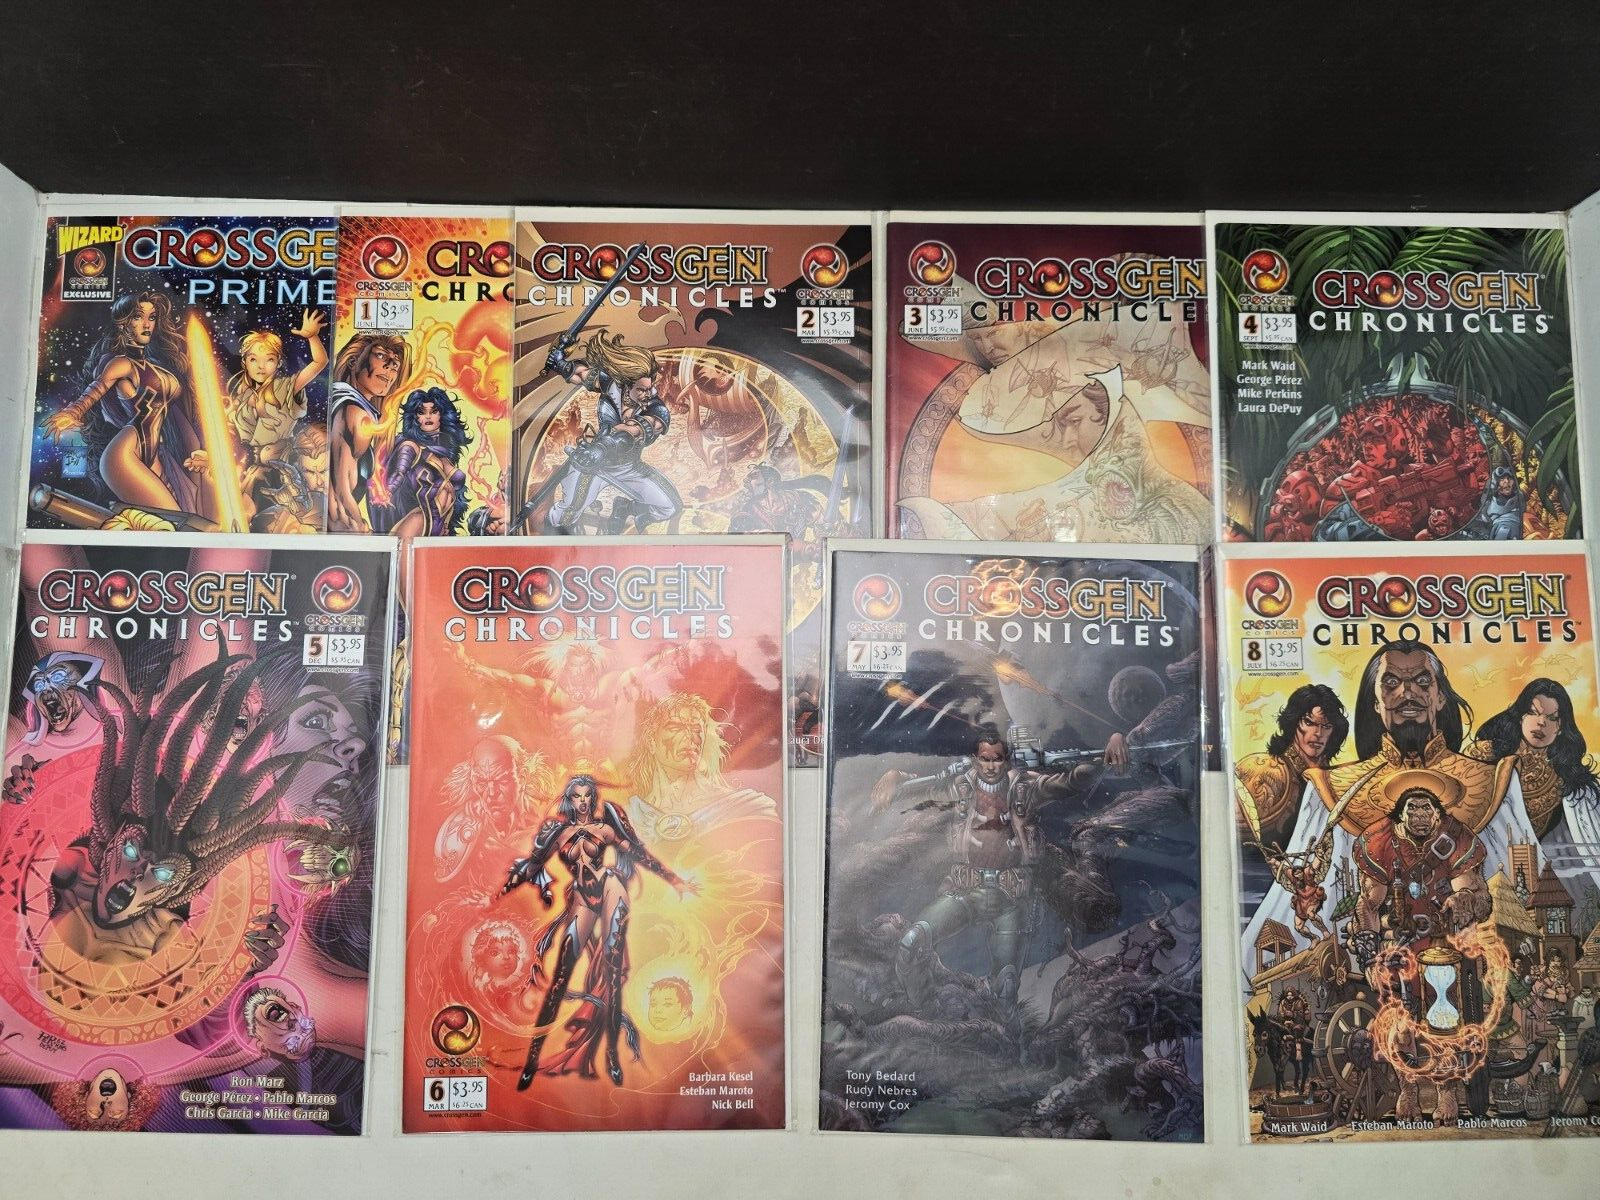 CROSSGEN CHRONICLES COMPLETE RUN #1-8 + PRIMER VF/NM GREAT CONDITION